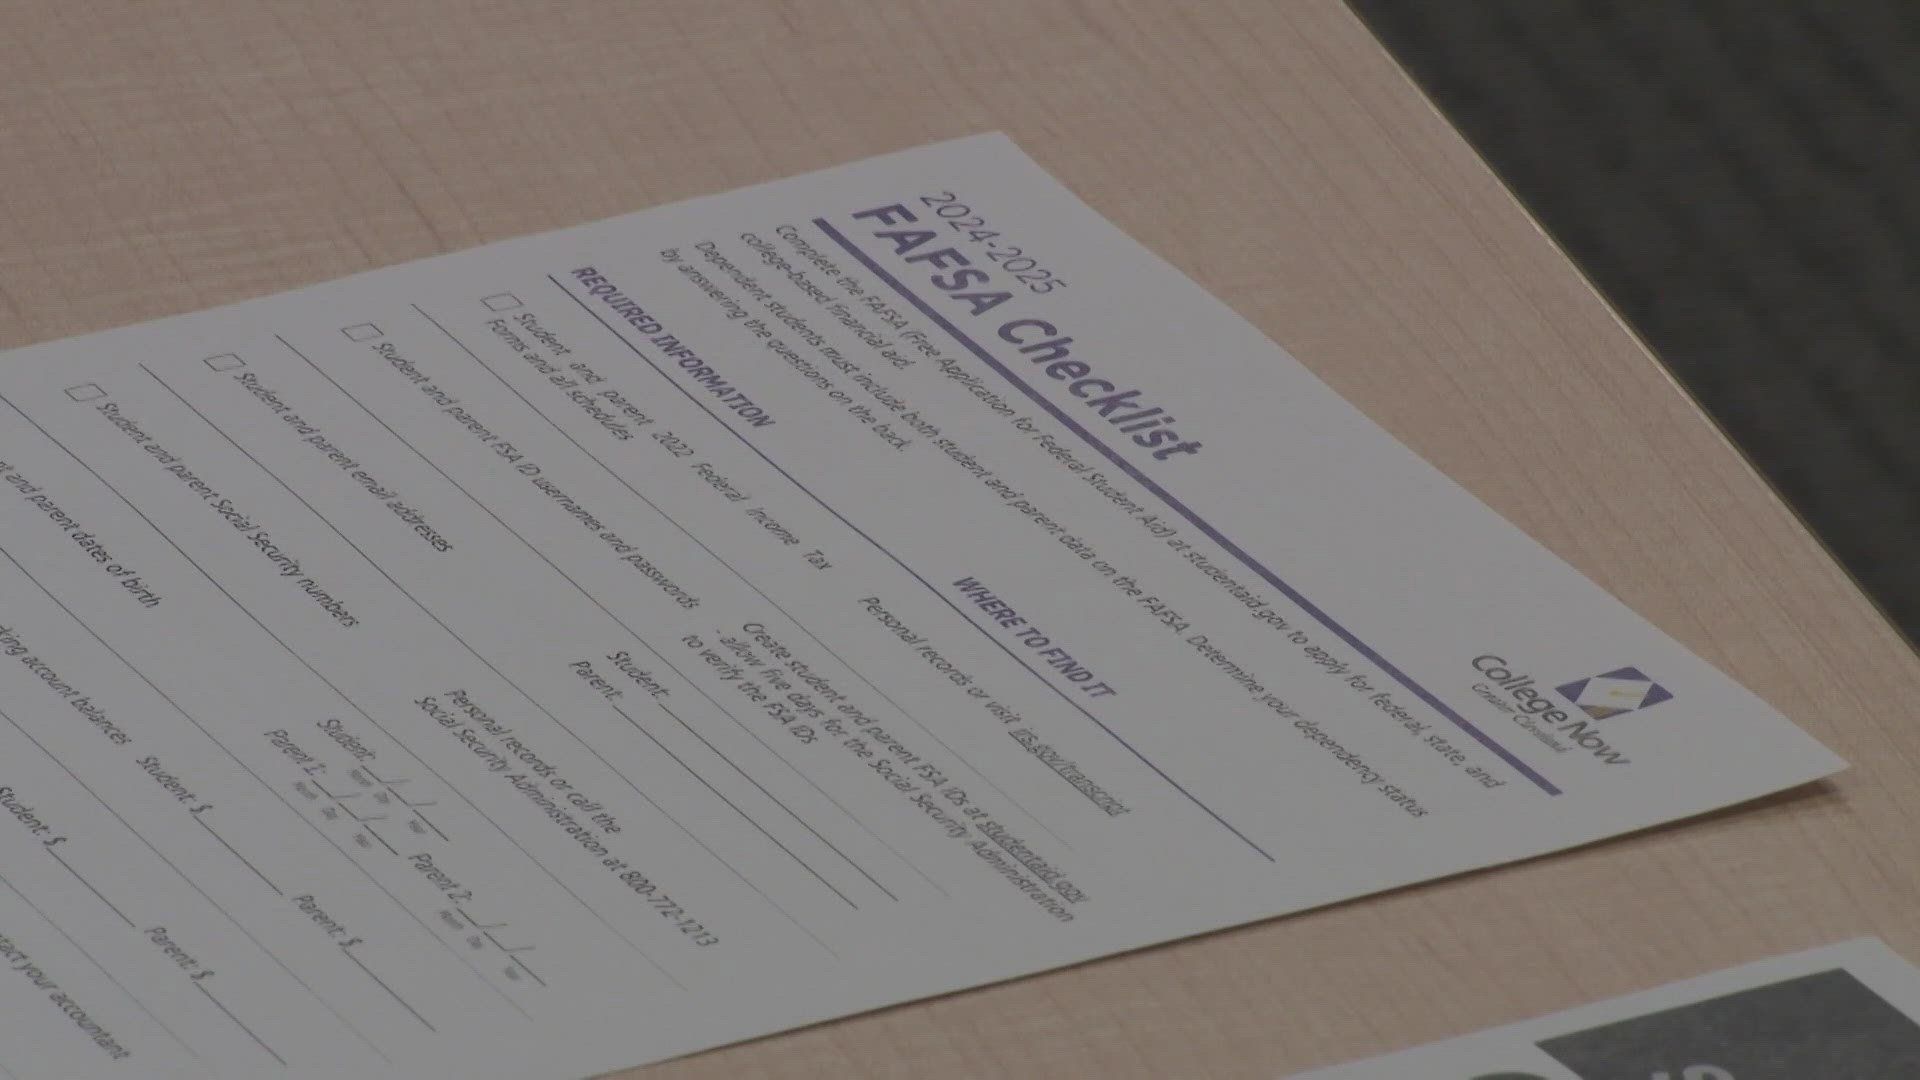 3News reached out to a dozen local colleges and universities. Of those that responded, more than half have pushed back their deposit deadlines due to FAFSA delays.